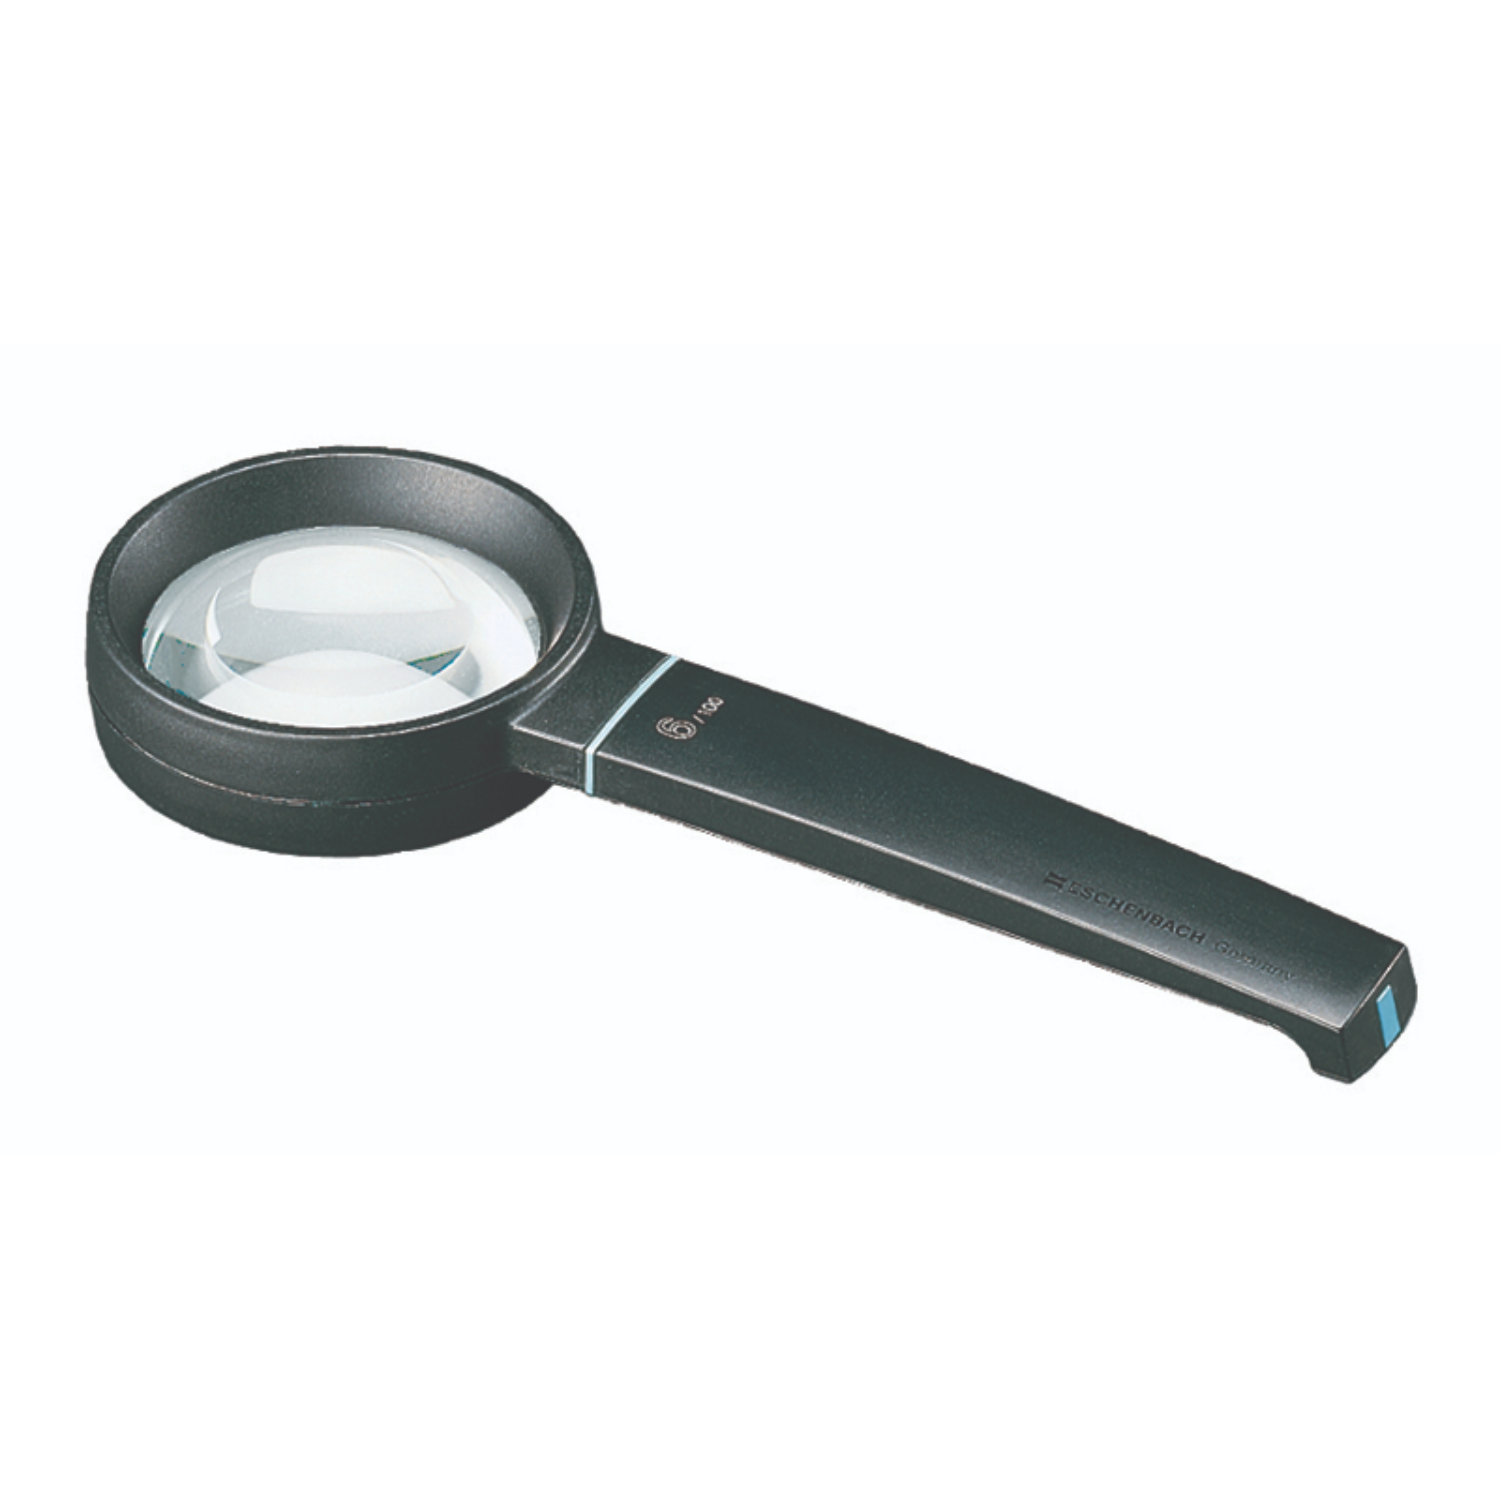 Image of the Aspheric II Round Hand-held 6x Magnifier from Eschenbach.